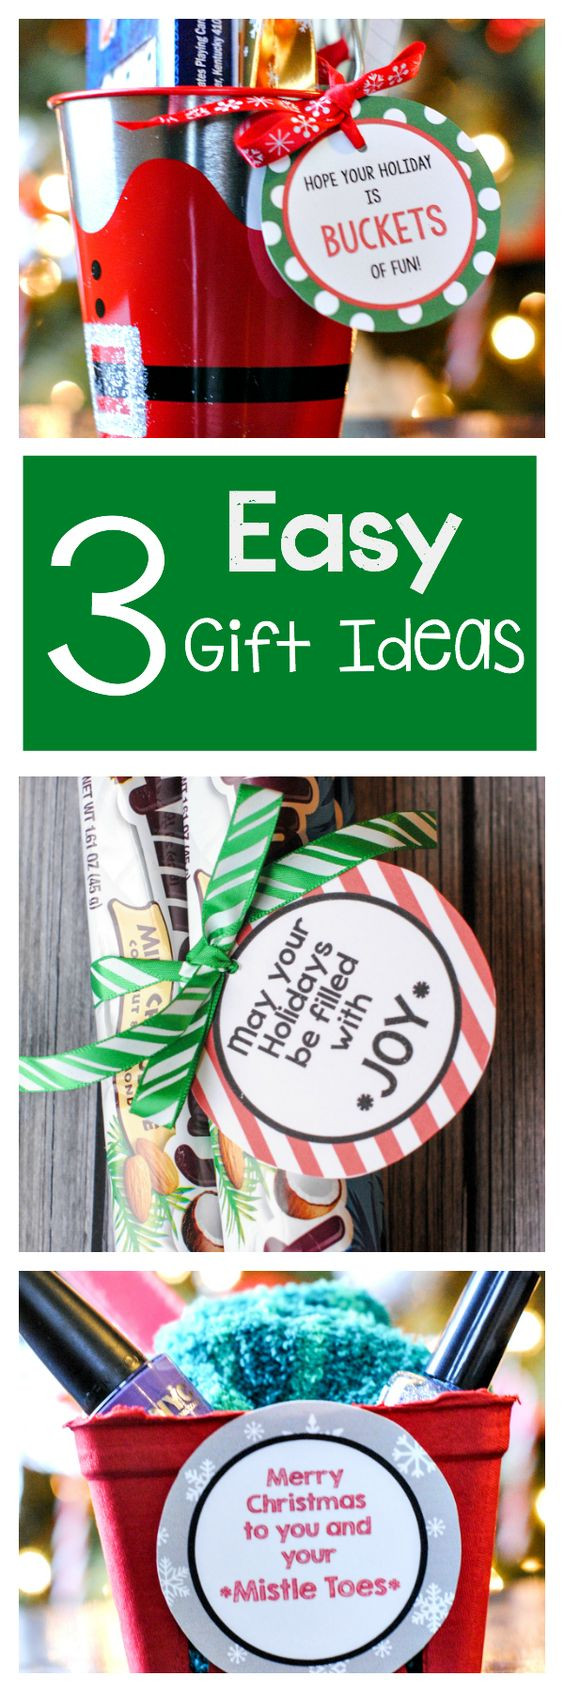 Easy Holiday Gift Ideas
 The BEST FREE Christmas Printables – Gift Tags Holiday